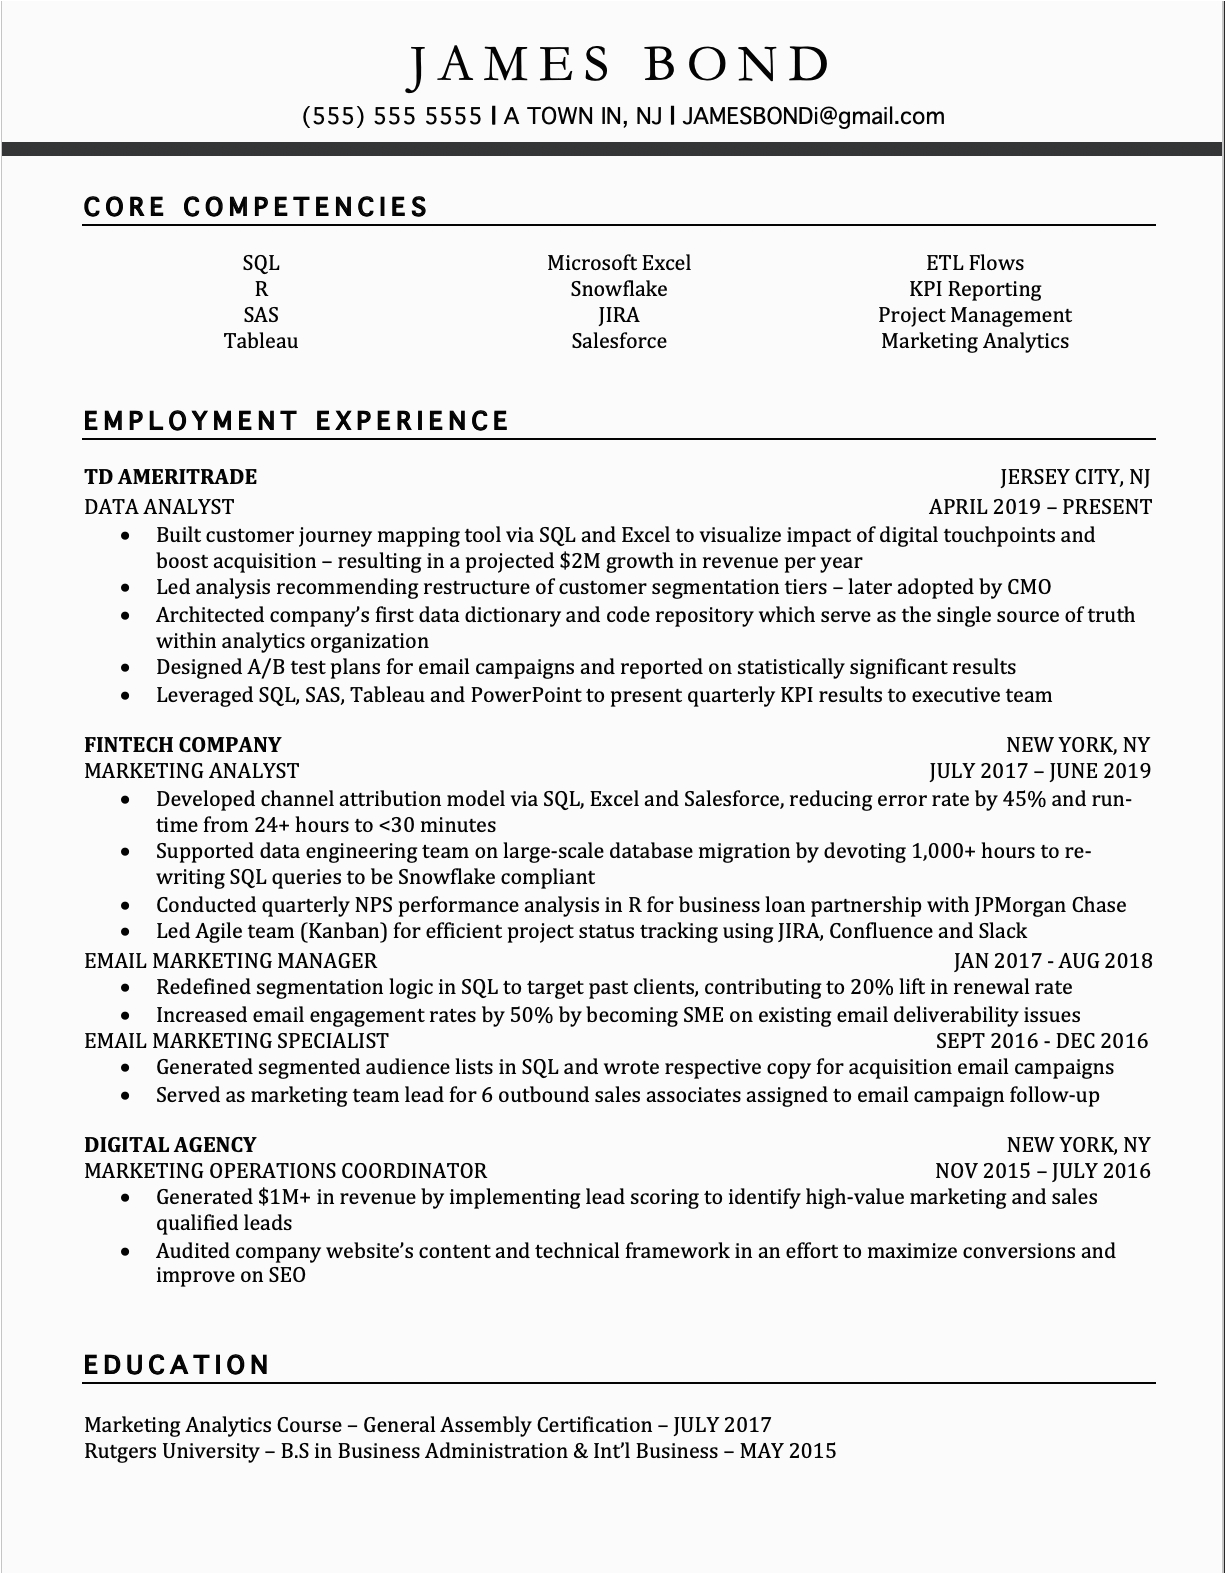 Sample Resumes for Information Technology Multiple Companies Resume format Multiple Positions In Same Pany